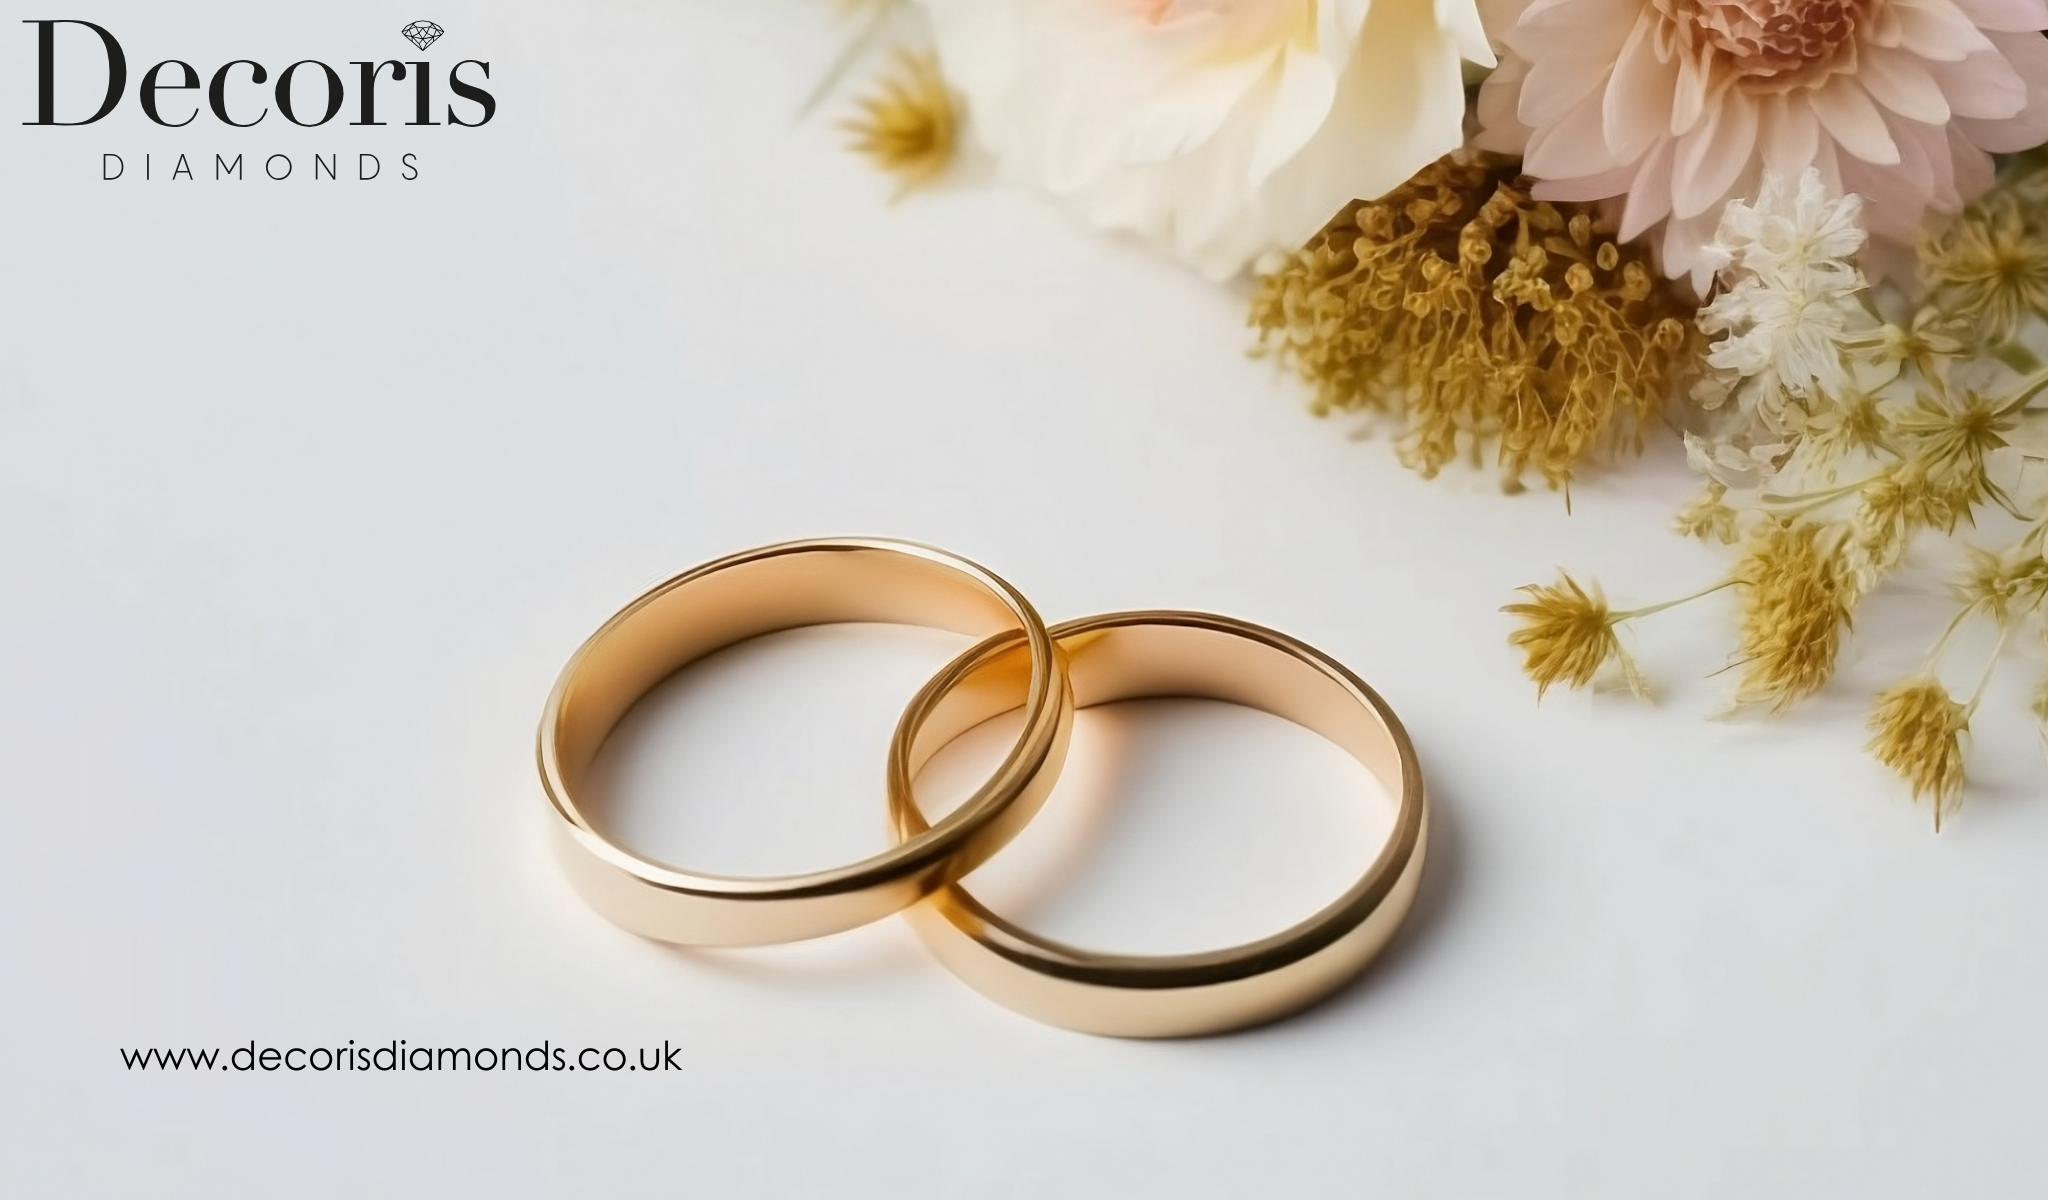 Creating Lasting Memories: How to Find the Ideal Wedding Rings Sets